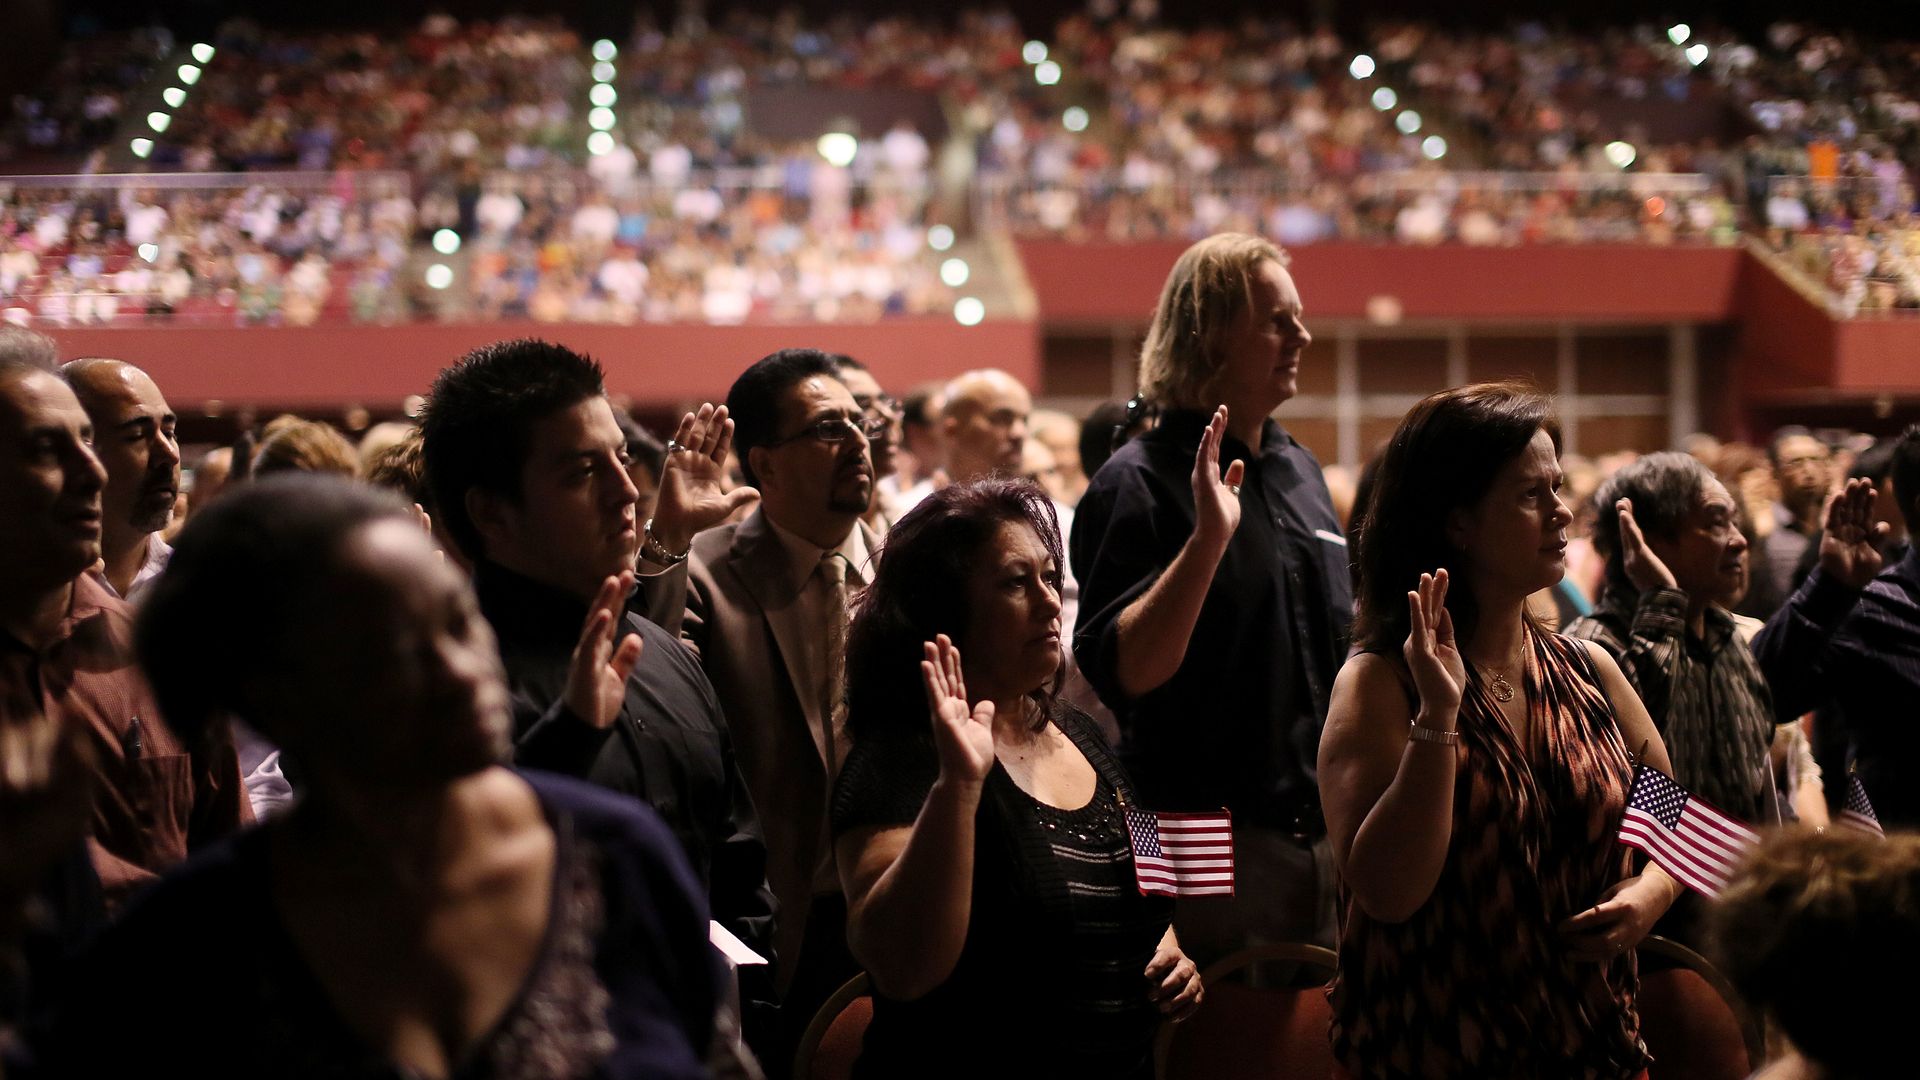 Citizens from around the world hold up their right hands as they recite the Pledge of Allegiance during a Naturalization Ceremony